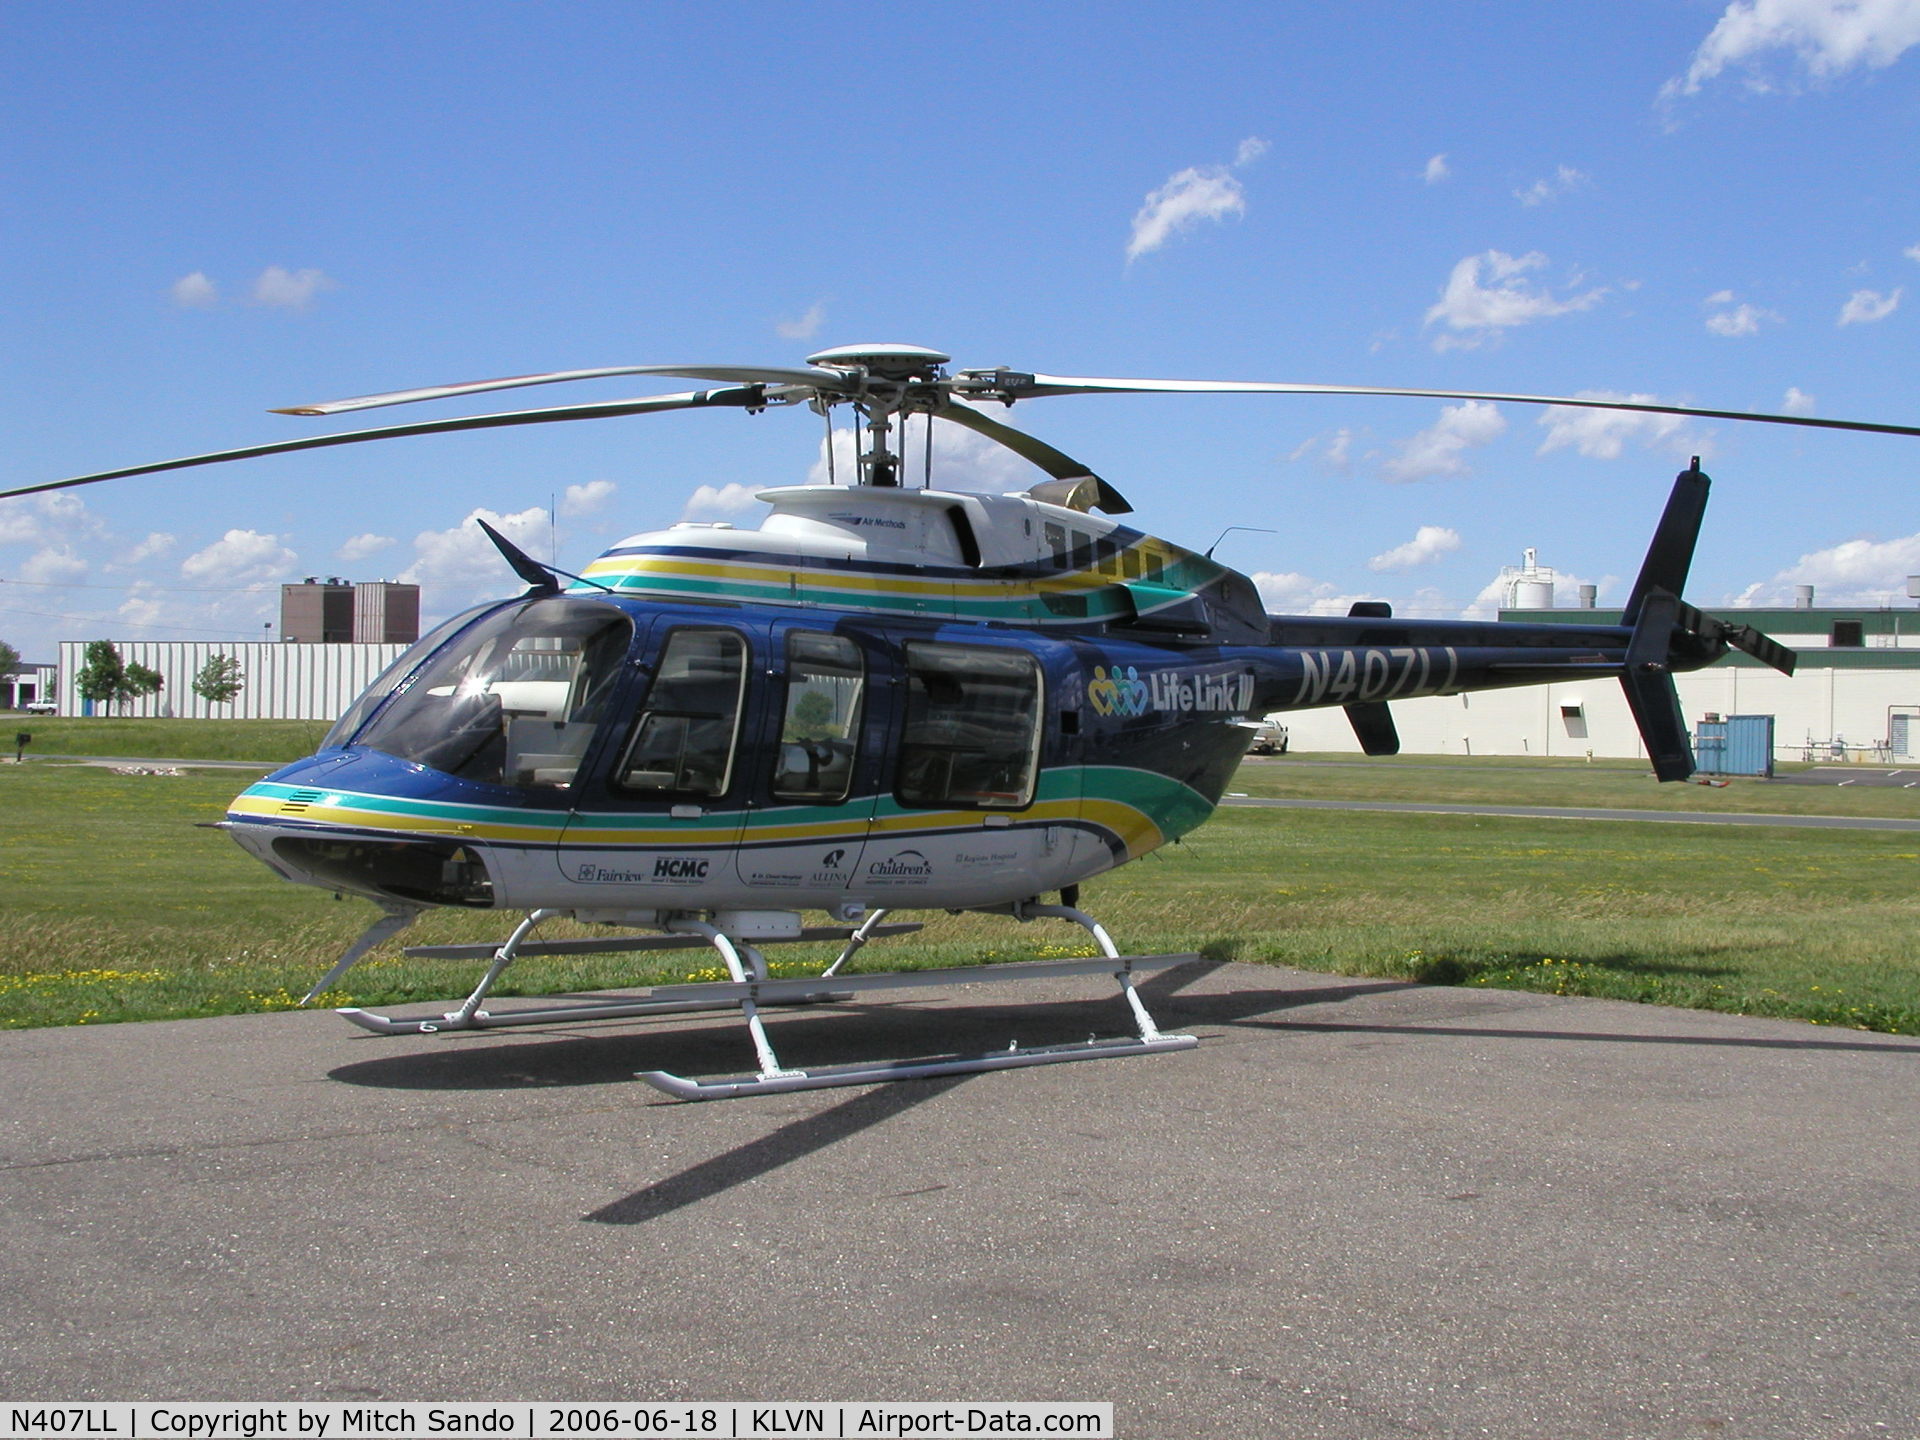 N407LL, 2003 Bell 407 C/N 53561, Life Link's Bell 407 sitting at Airlake on a great day!